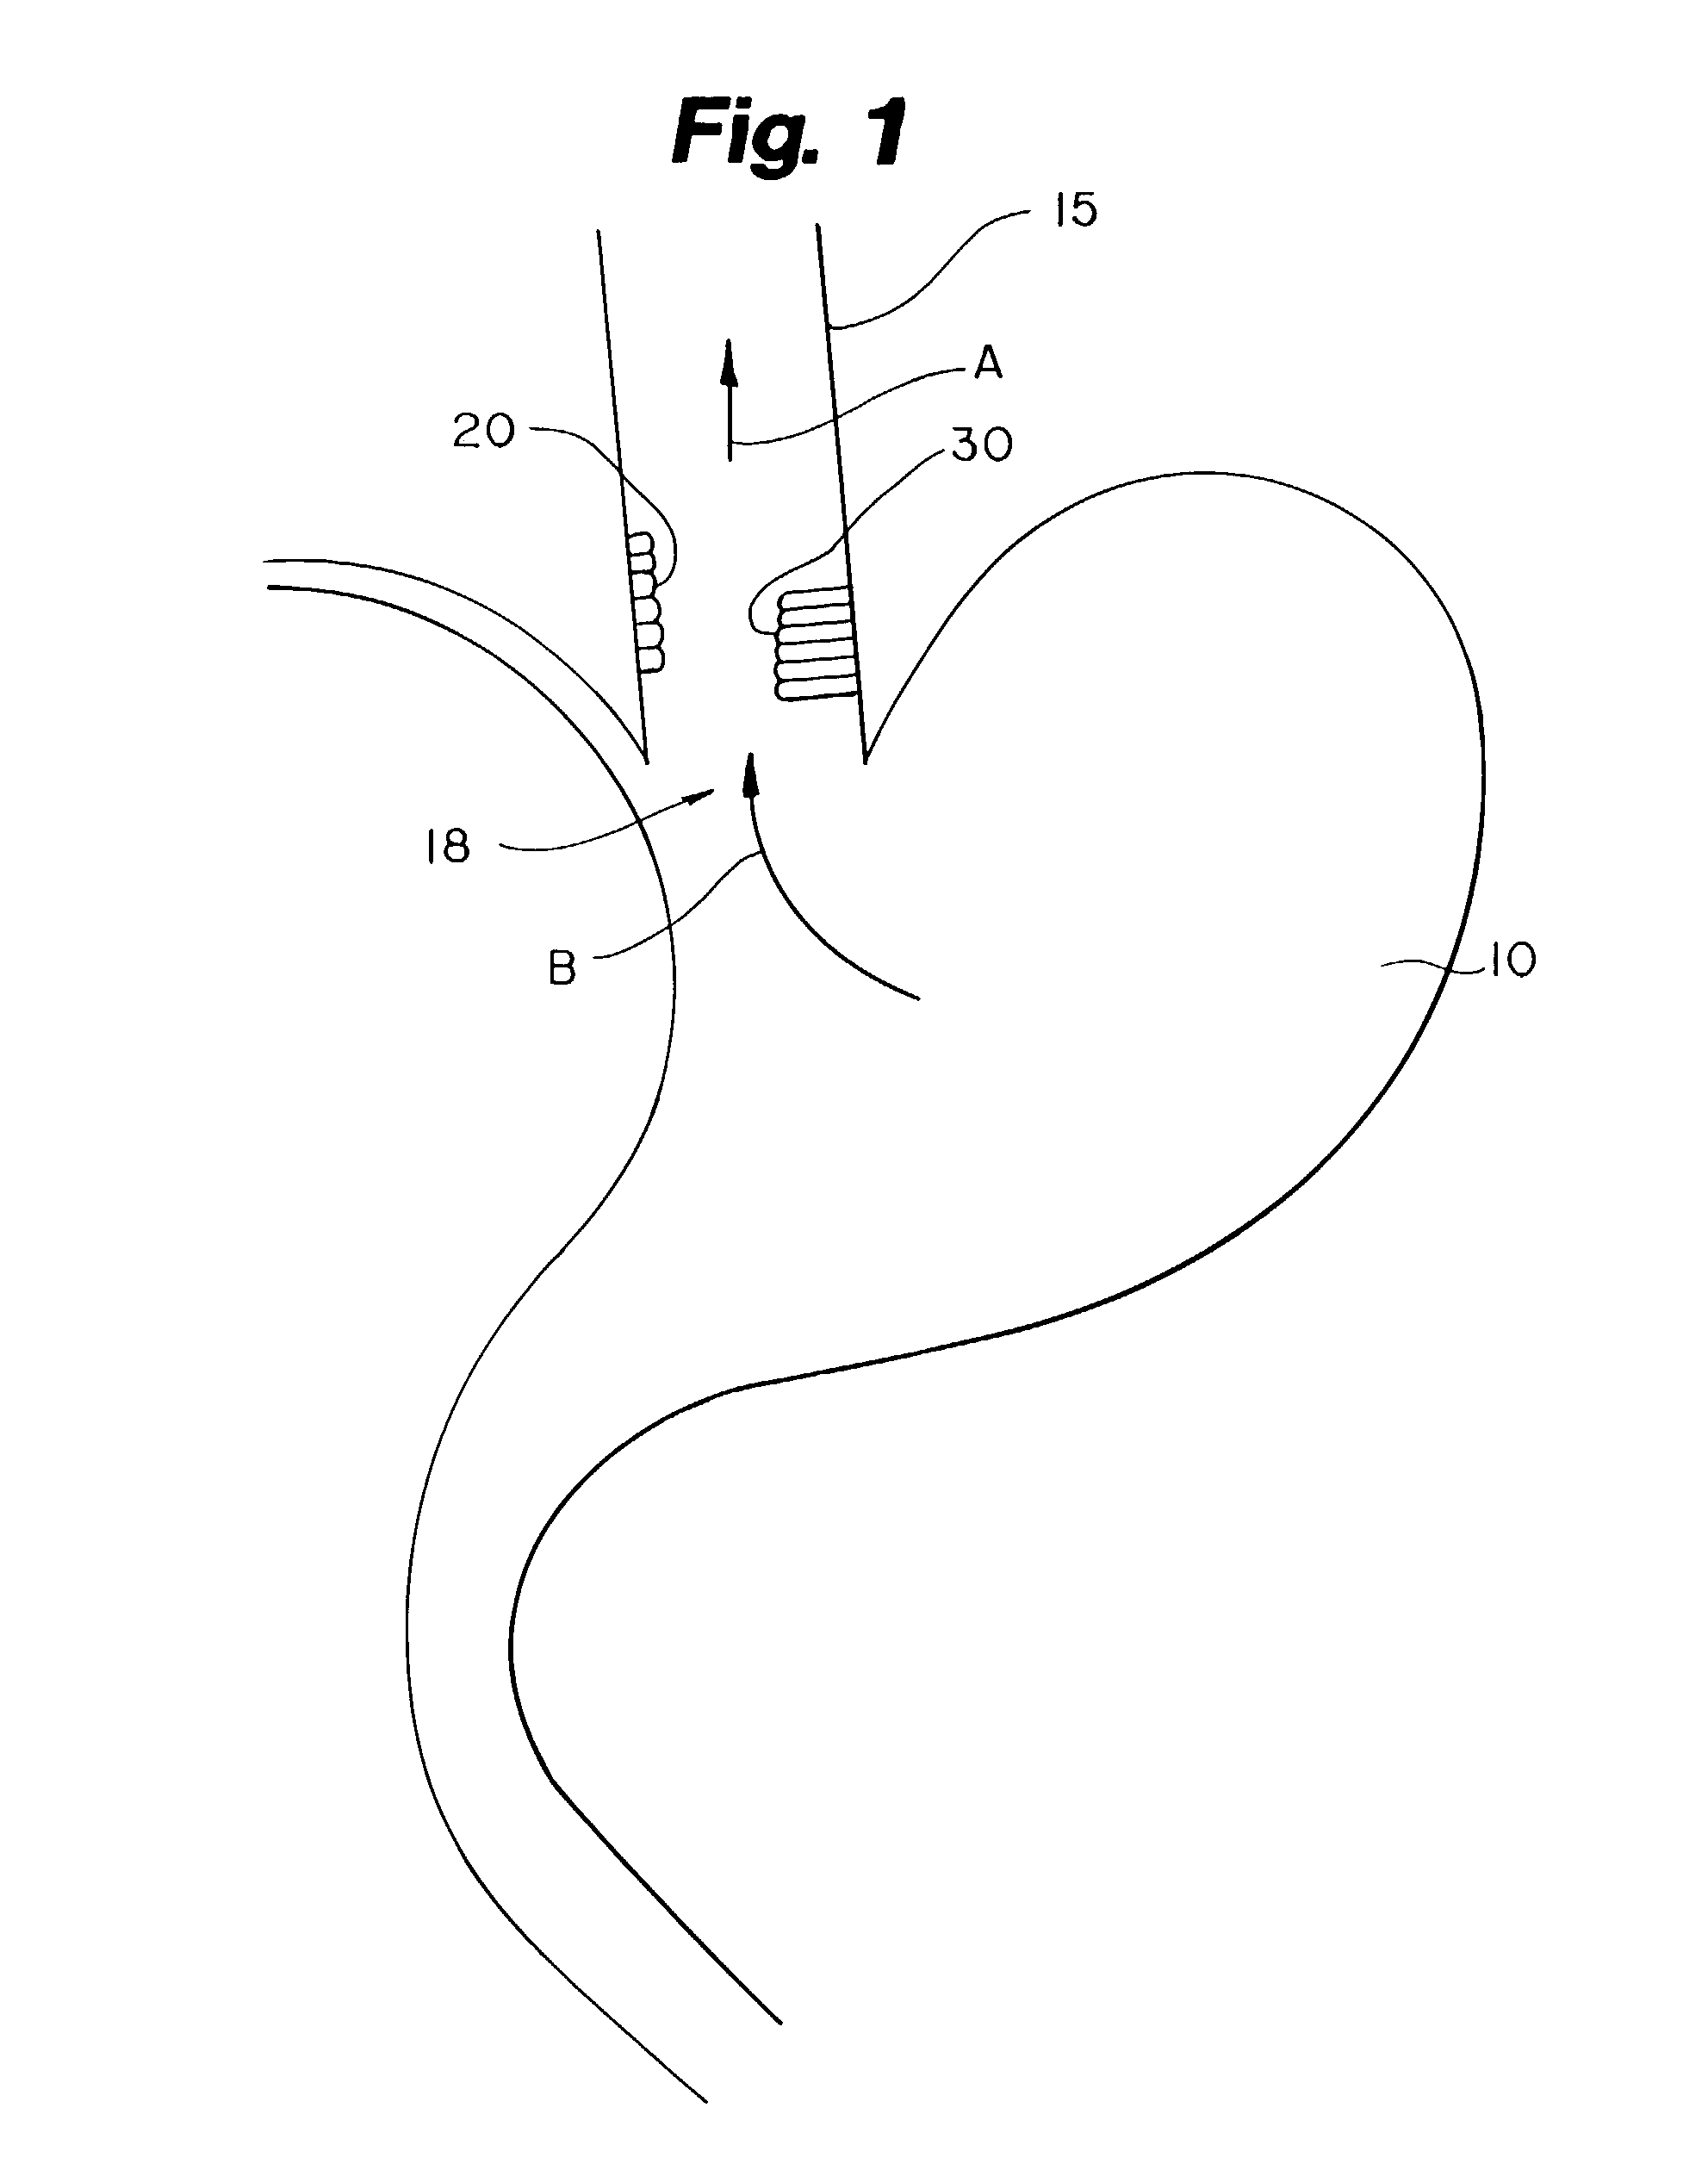 Method of treating abnormal tissue in the human esophagus